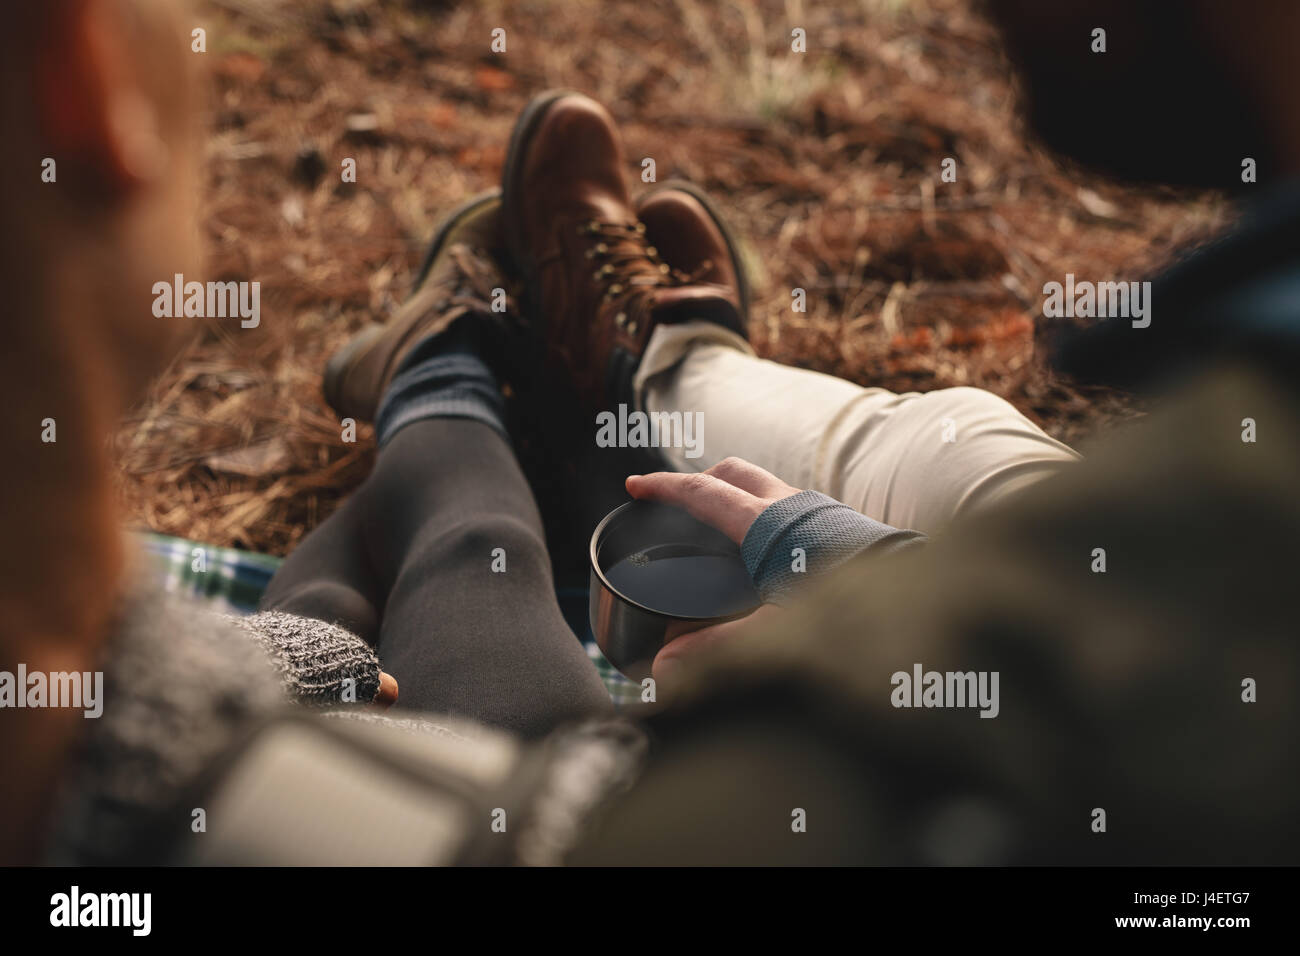 Close up of young couple sitting together outdoors, focus on hands holding cup of coffee. Hikers resting on mountain trail. Stock Photo